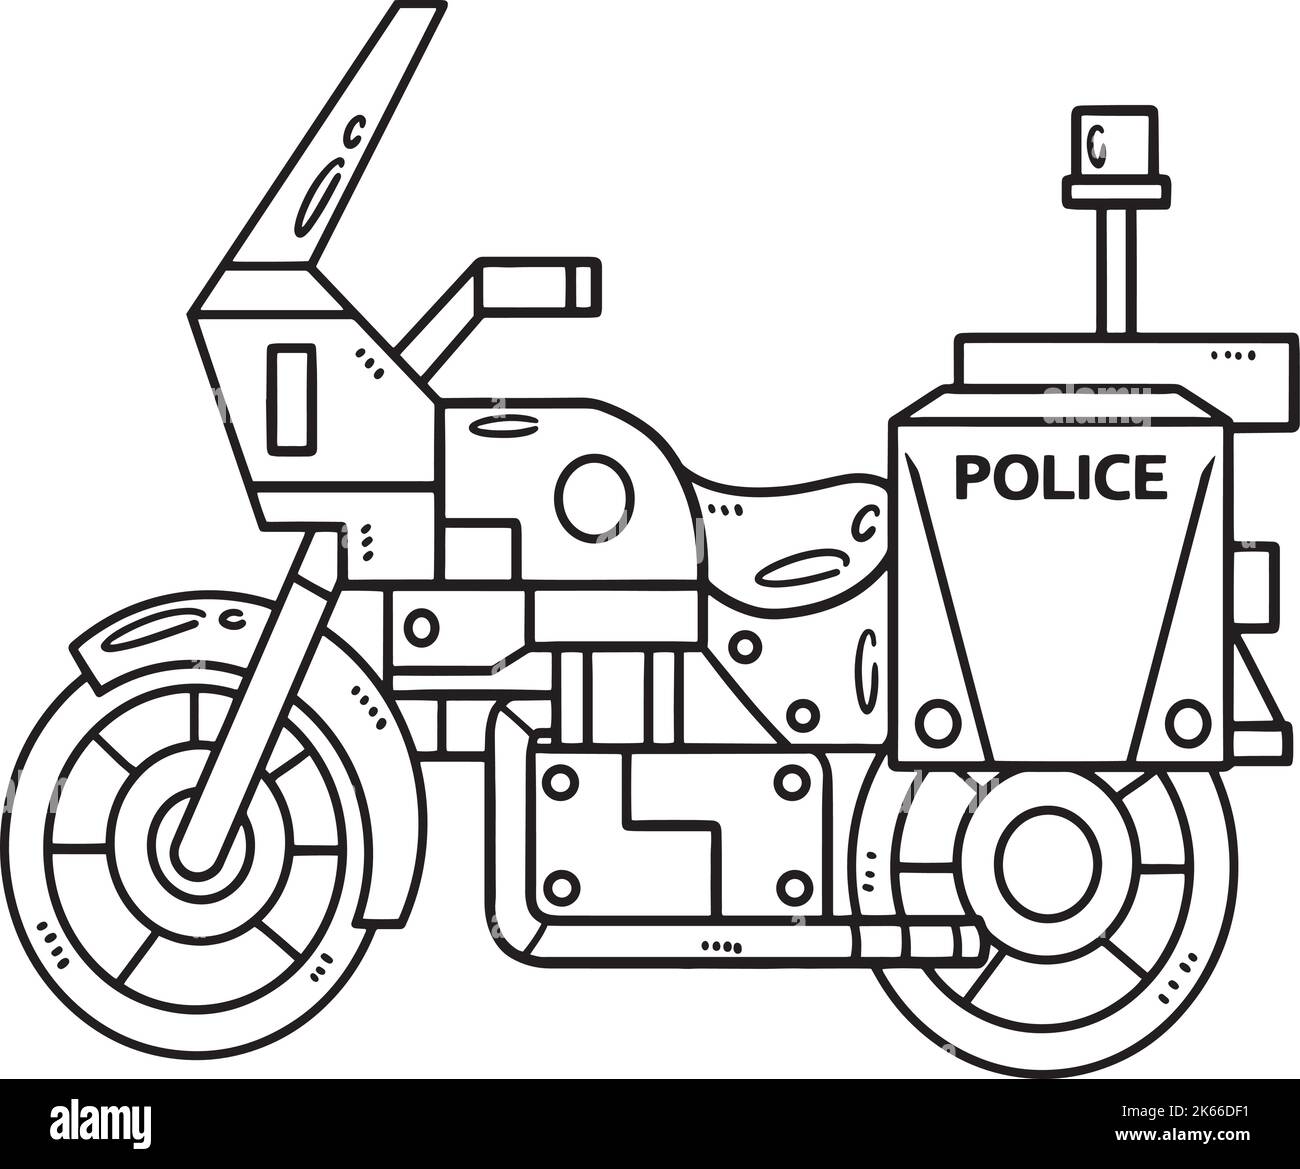 Police Motorcycle Isolated Coloring Page for Kids Stock Vector